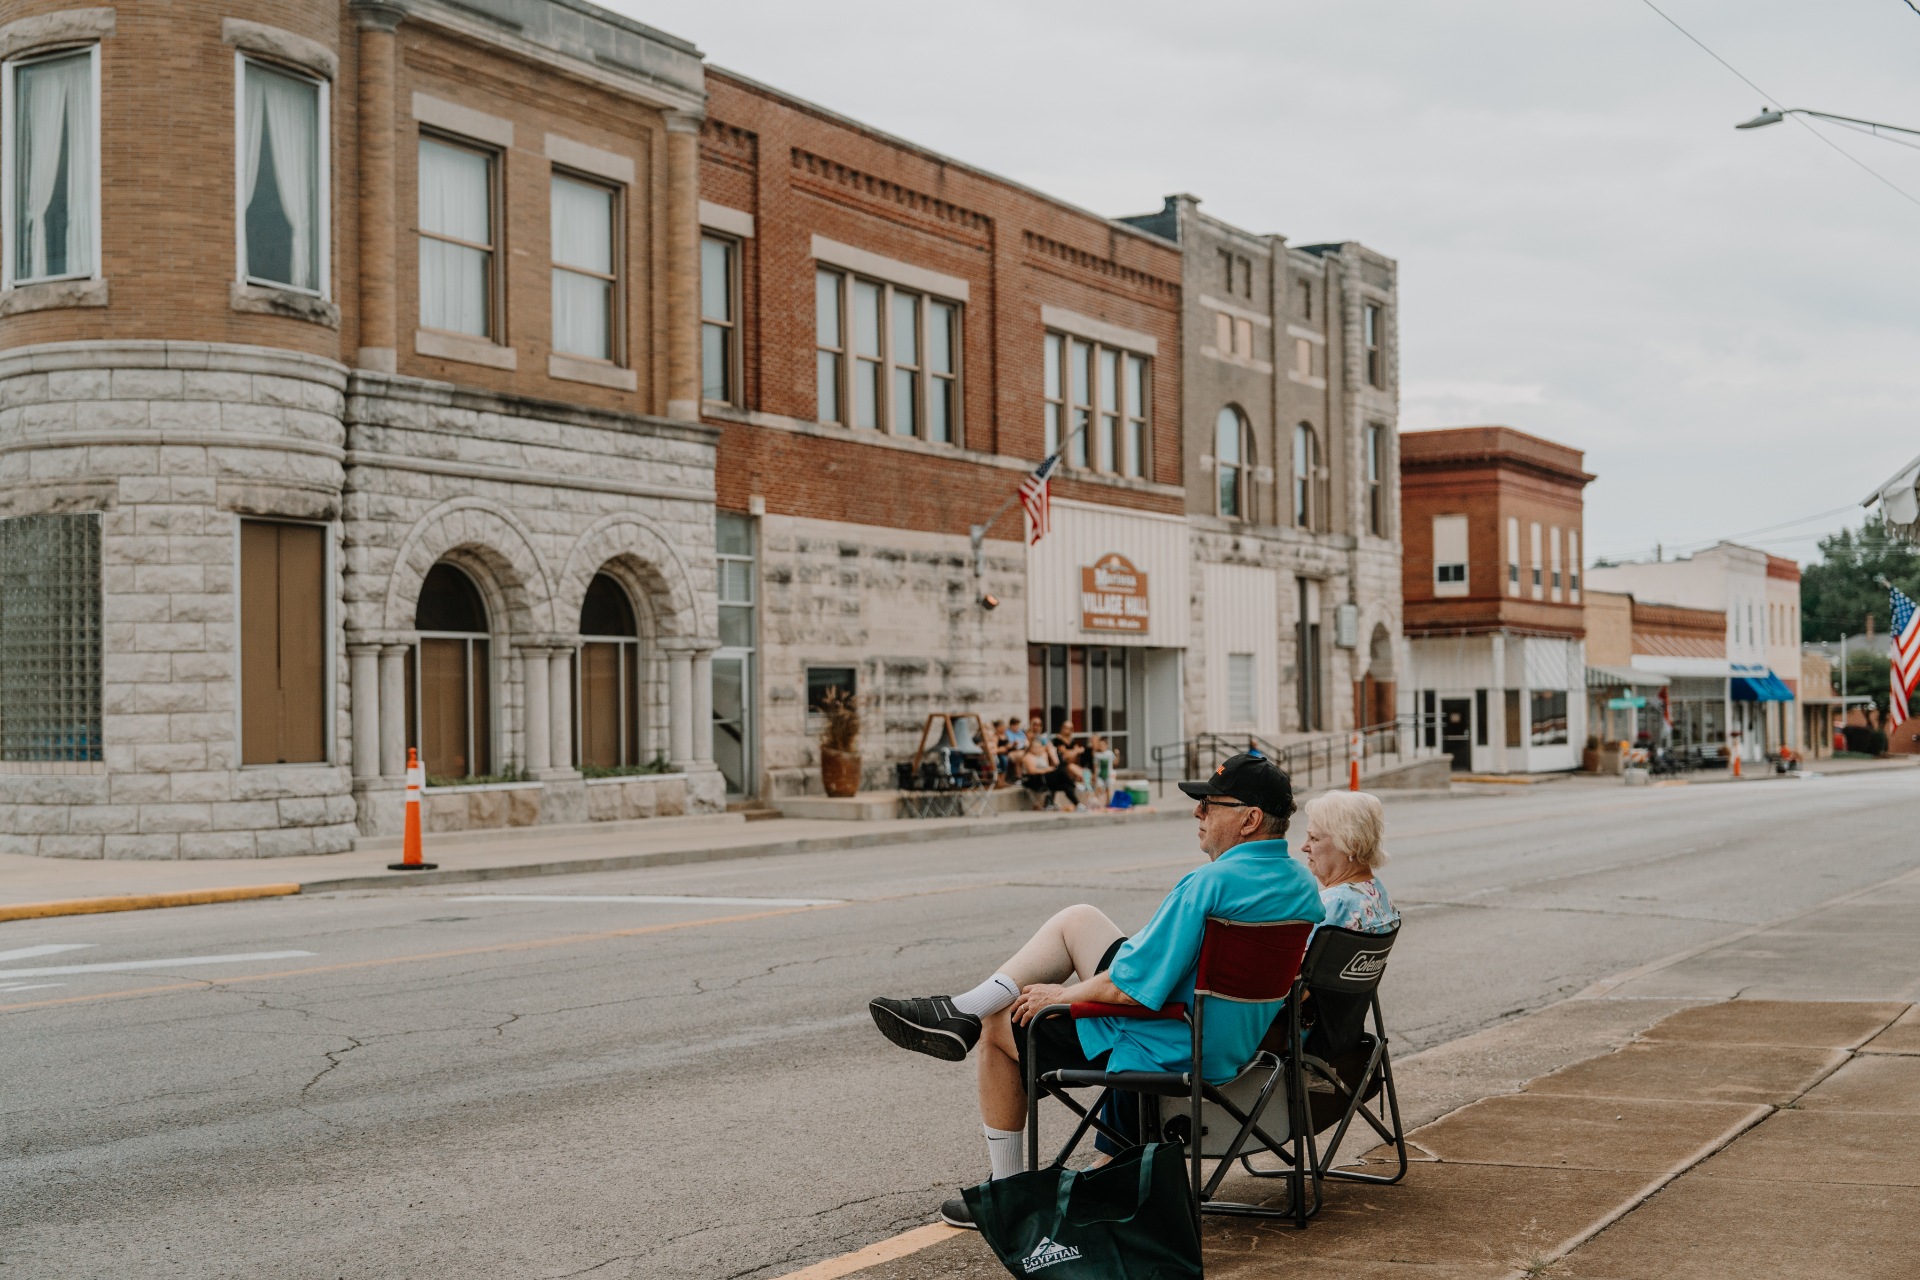 An older couple sits in folding chairs on one side of an empty street looking across at people in chairs on the other side